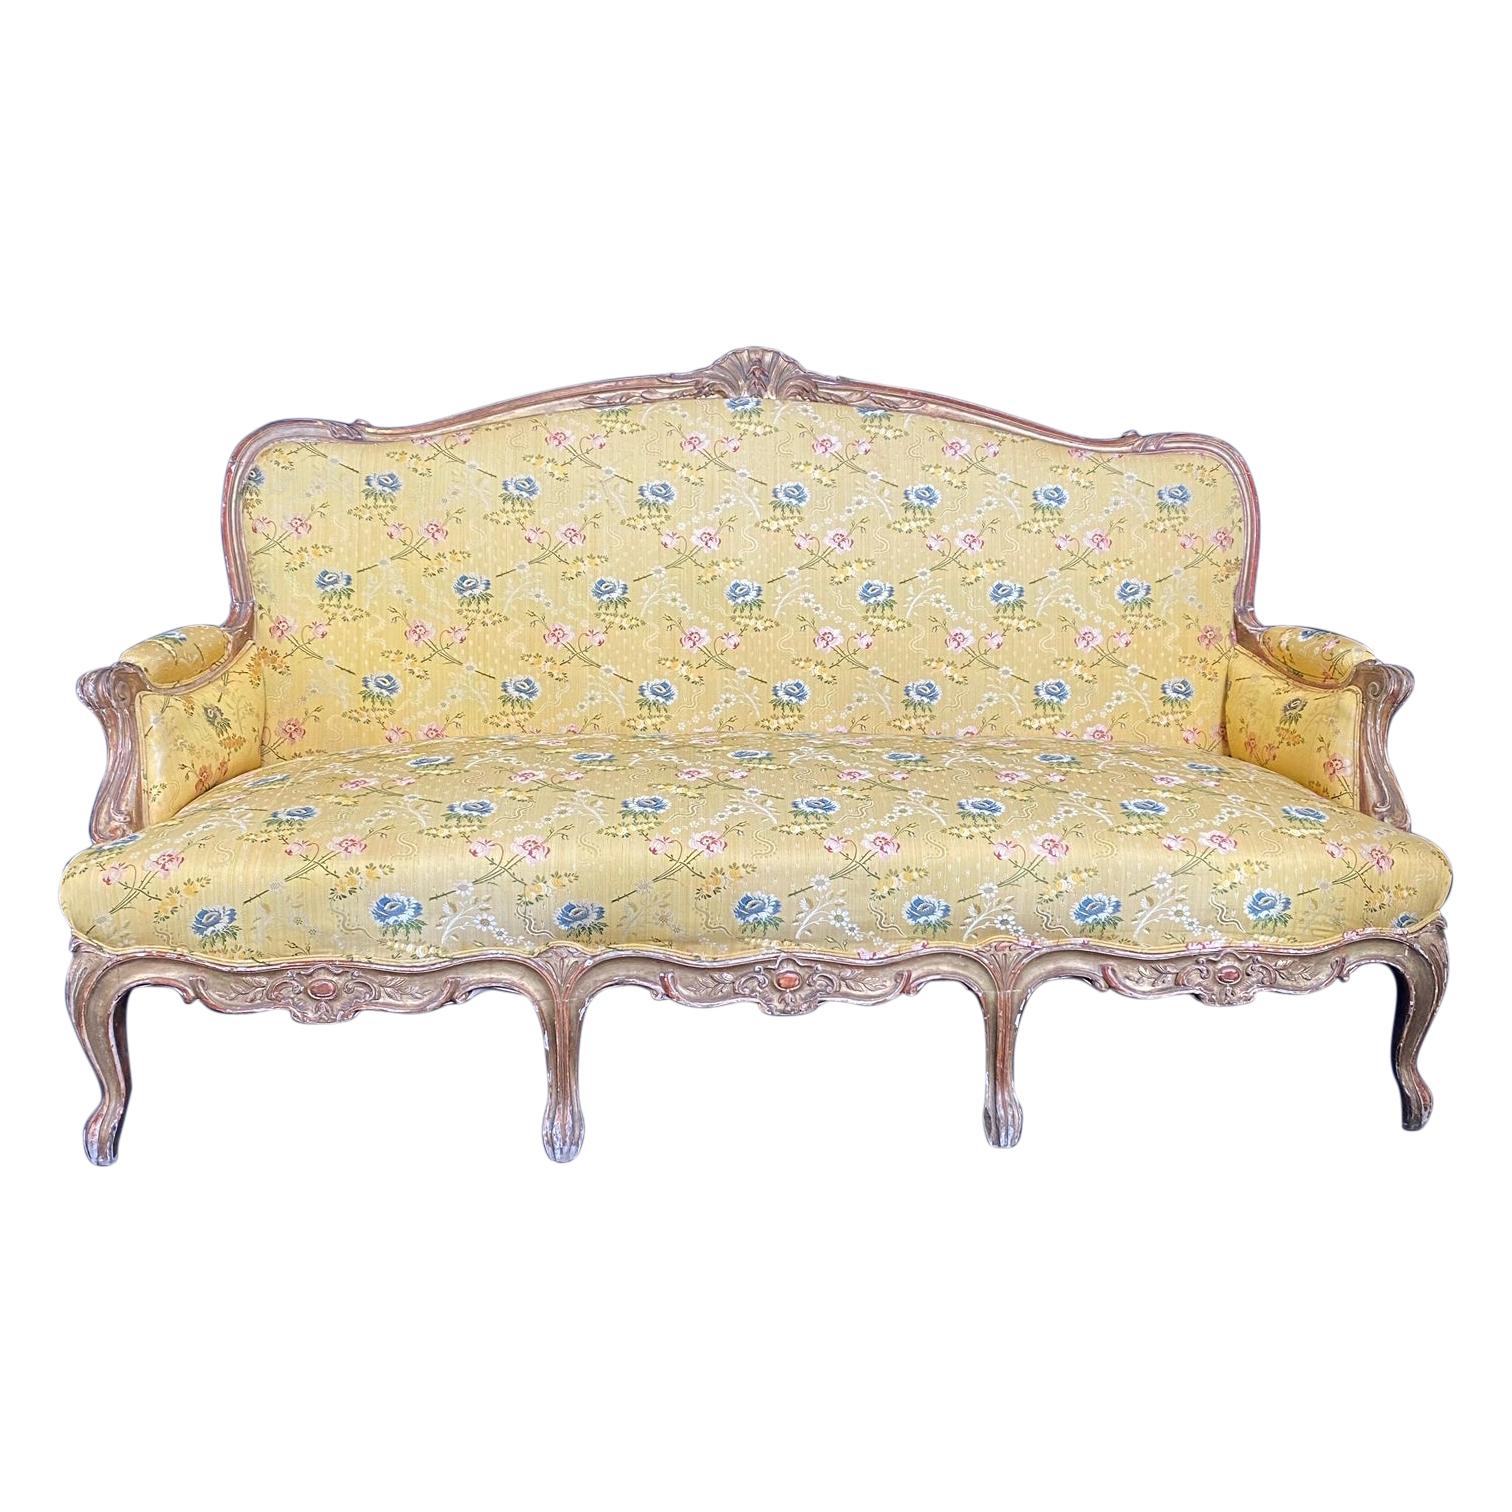 Superb Carved Gilded 19th Century Louis XV Settee or Sofa